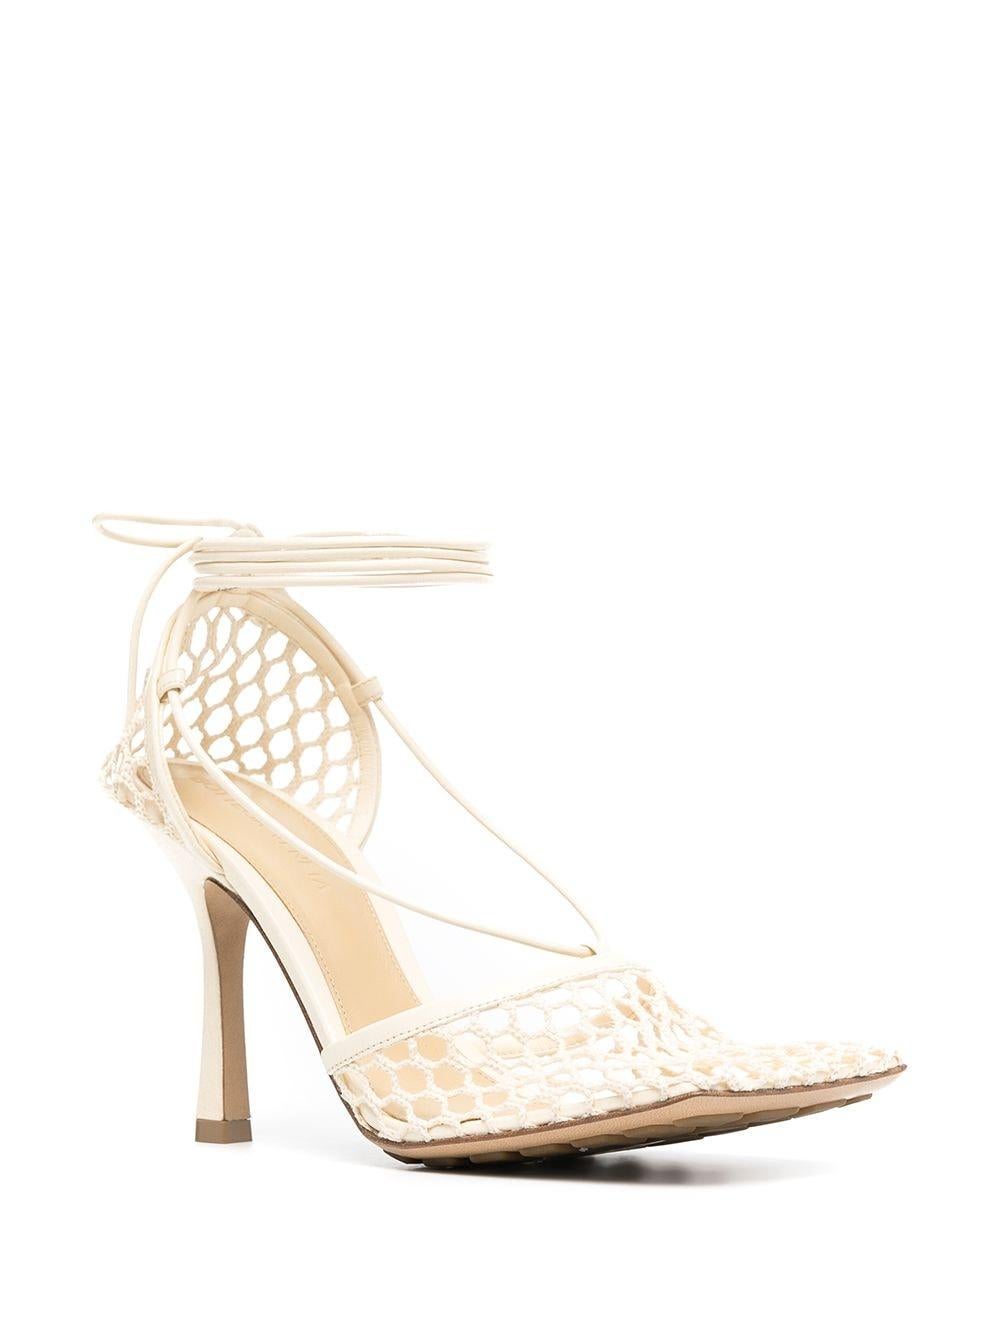 The Bottega Veneta Stretch Mesh Panel Sandals Are Already Poised To Be The Shoe Of The Summer Essence